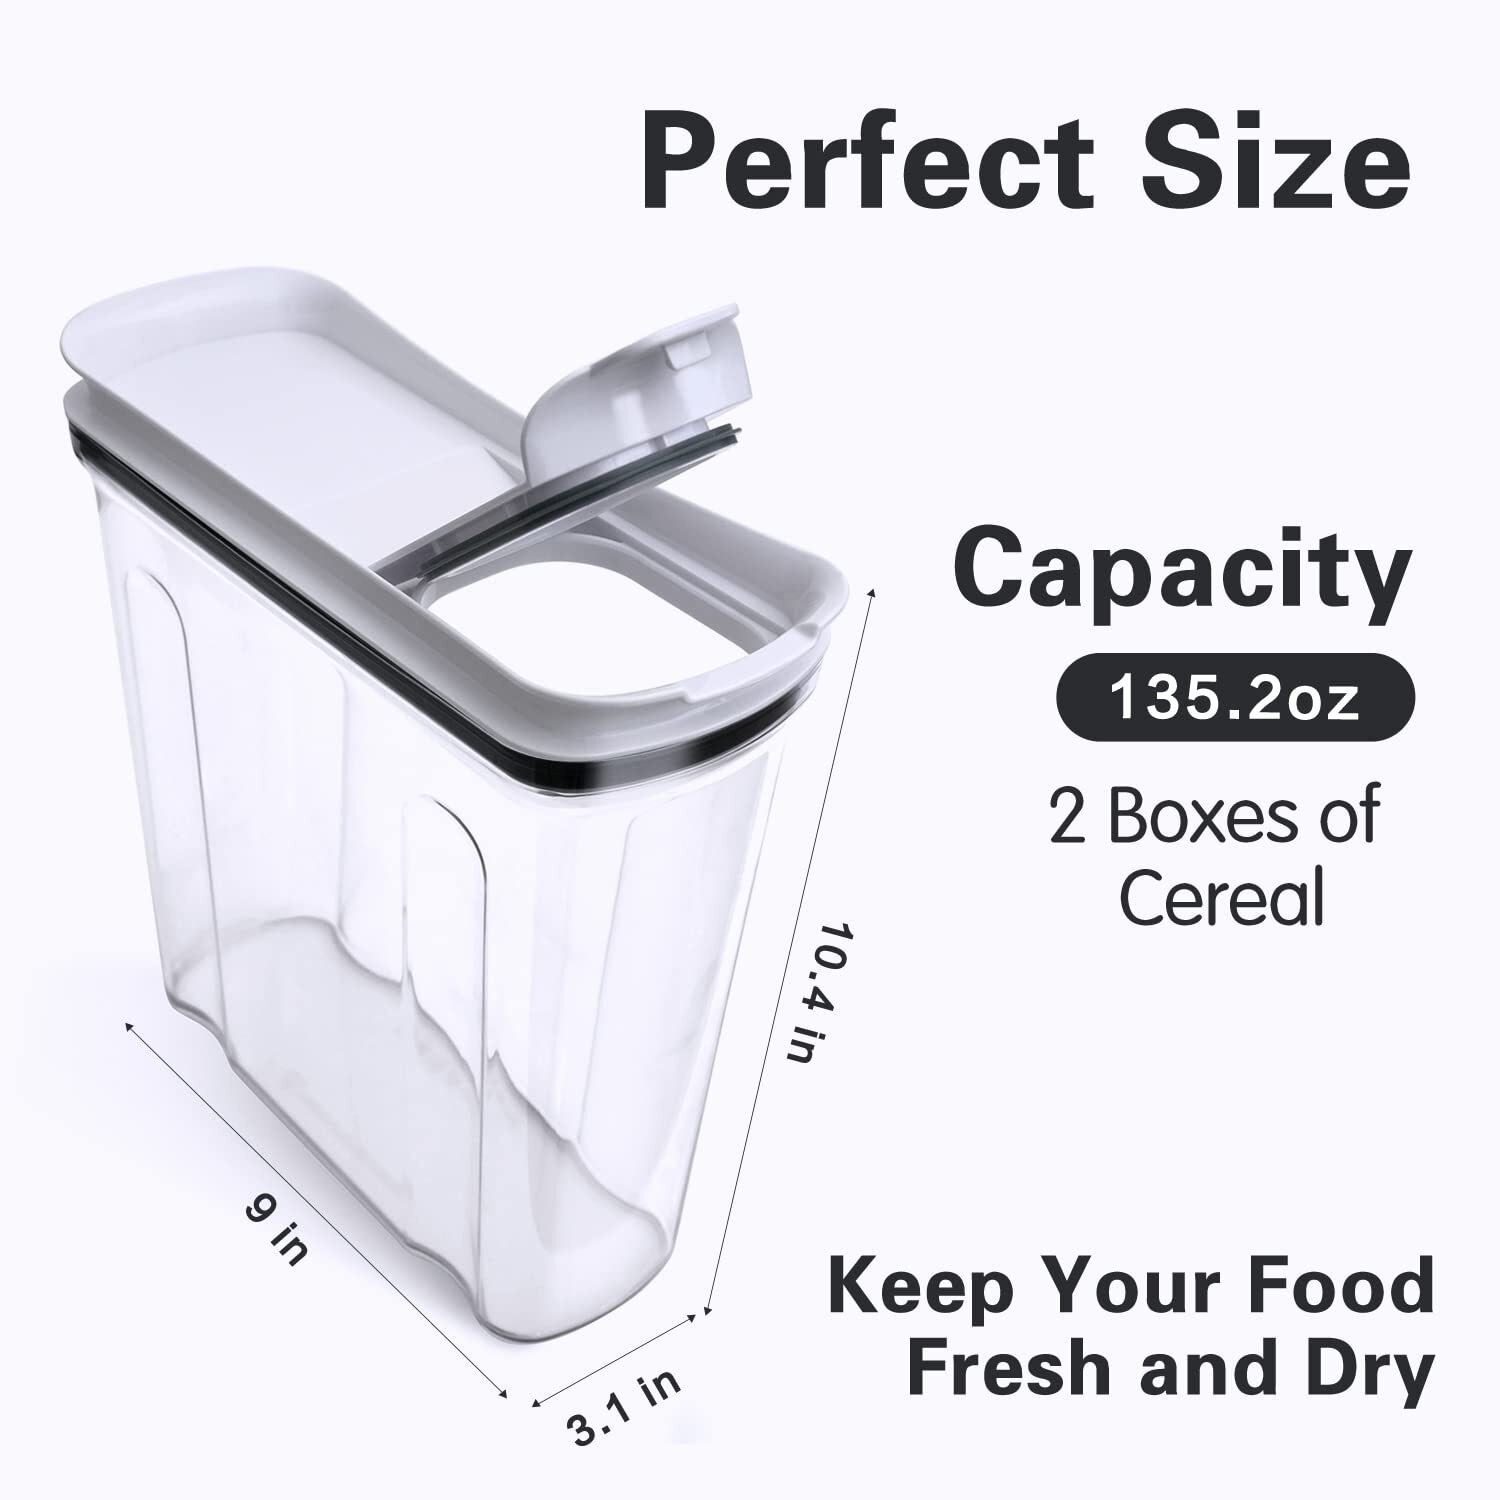 Cereal Containers Storage Set, Airtight Food Storage Container with Lid 4L/135.2oz,4PCS BPA-FREE Plastic Pantry Organization Canisters for Rice Cereal Flour Sugar Dry Food in Kitchen